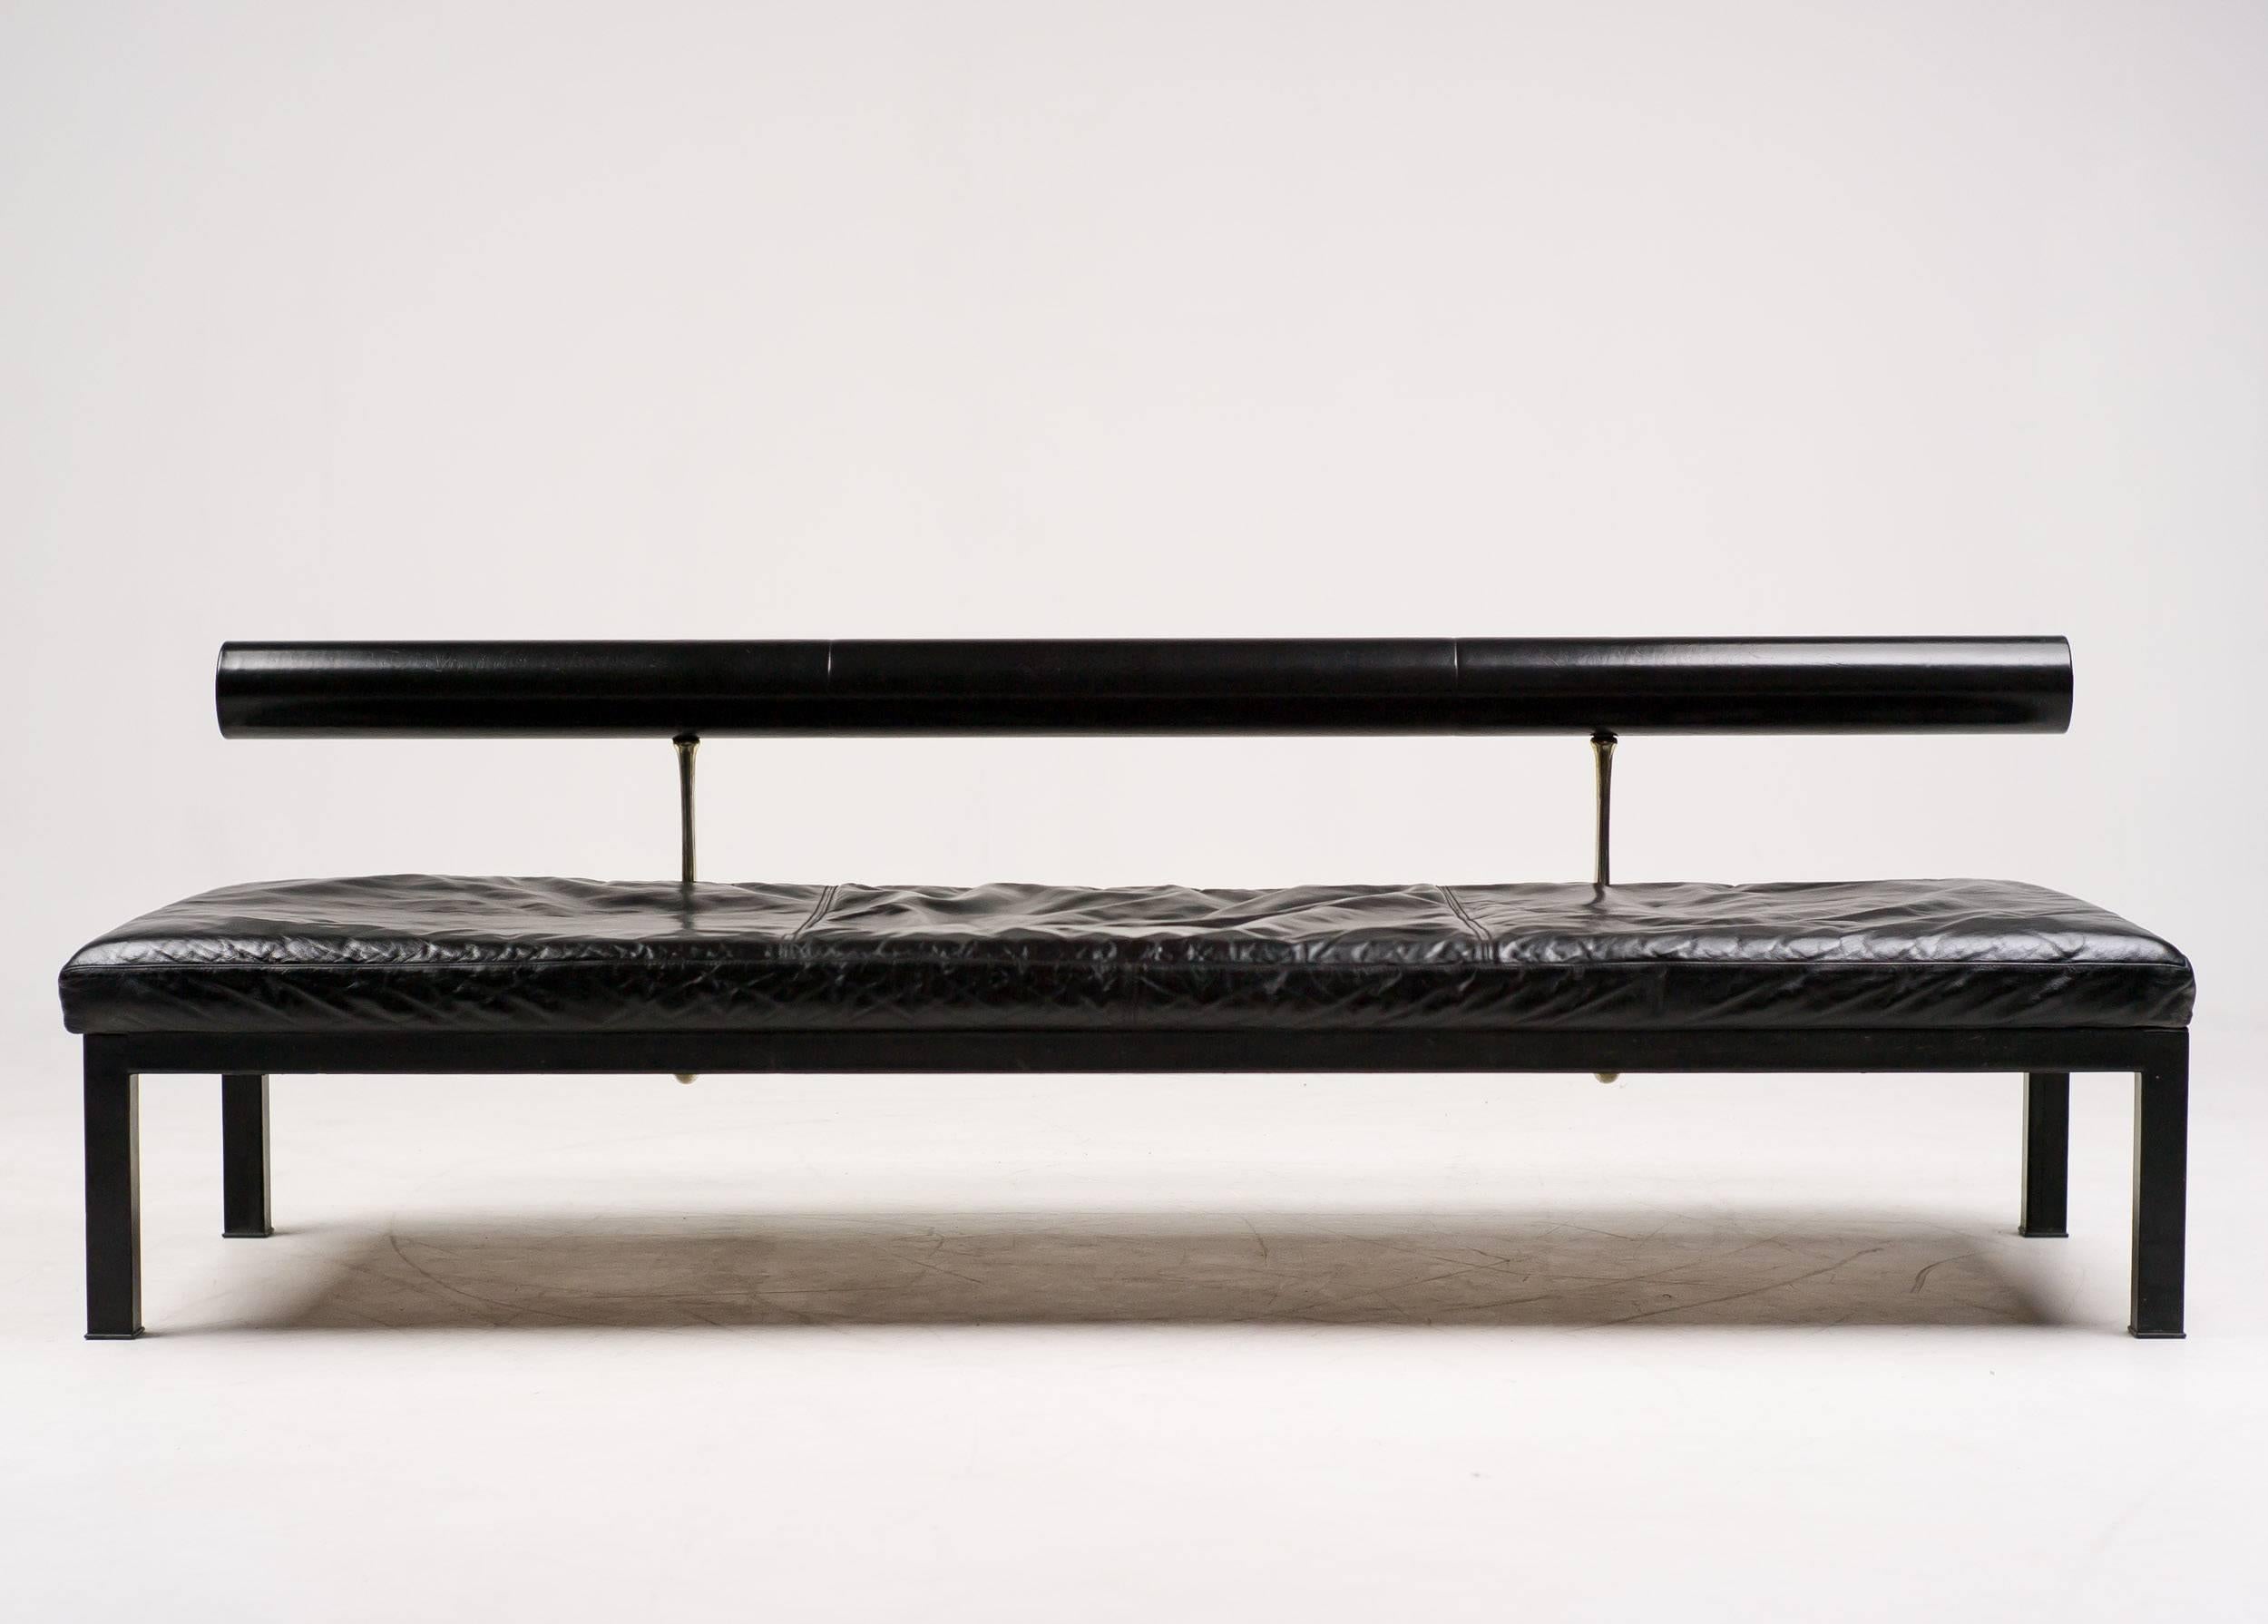 This early Sity daybed was designed by Antonio Citterio and manufactured by B&B Italia in the 1980s. It features a black leather covered frame with four legs and a steel supported wooden platform with embossed manufacturer or designer label. The